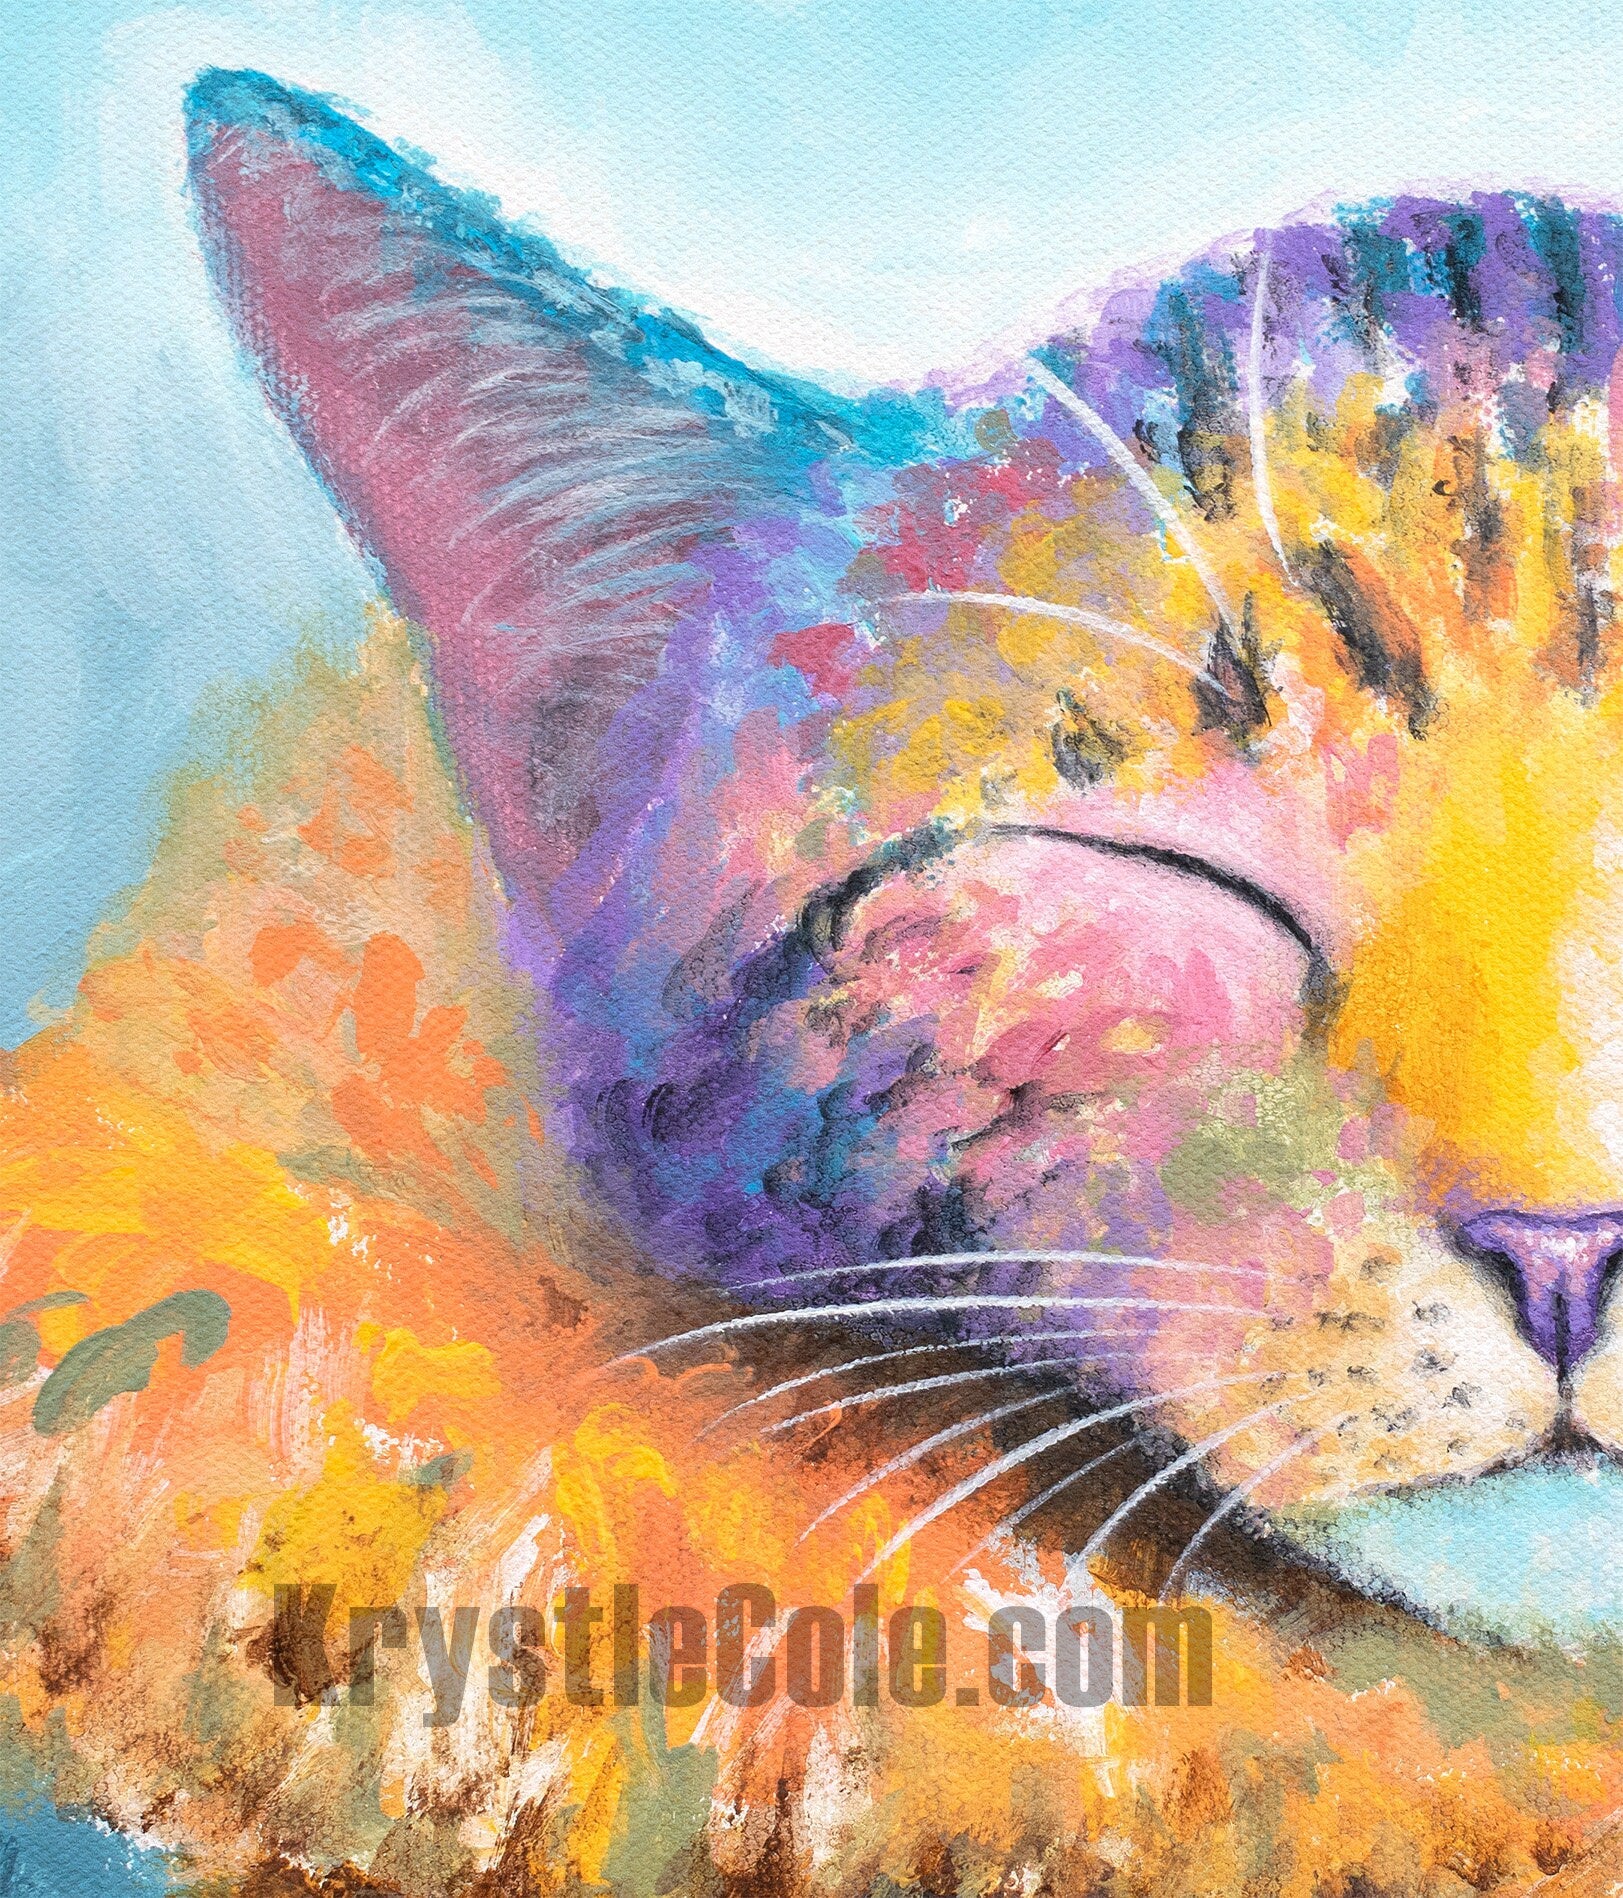 Sleeping Kitten Painting - Cat Art Print on CANVAS or PAPER by Krystle Cole